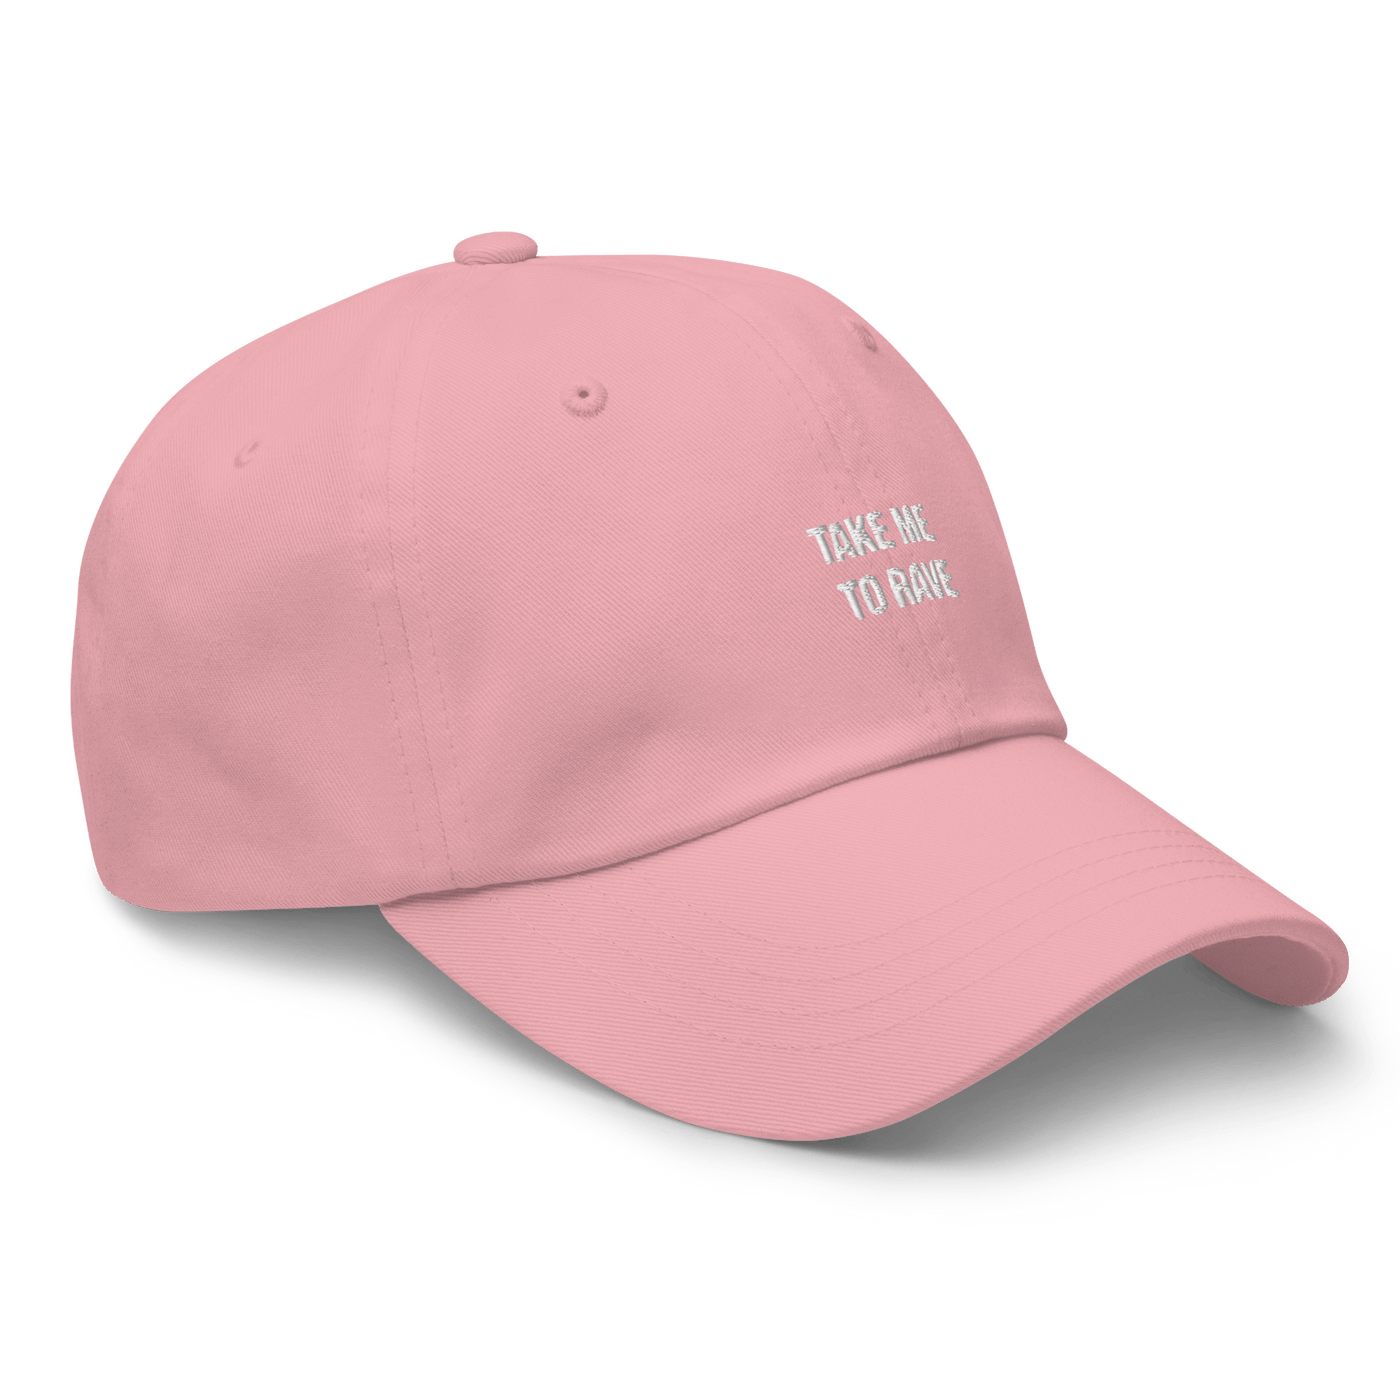 Take me to rave Dad hat - Pink - - Just Another Cap Store